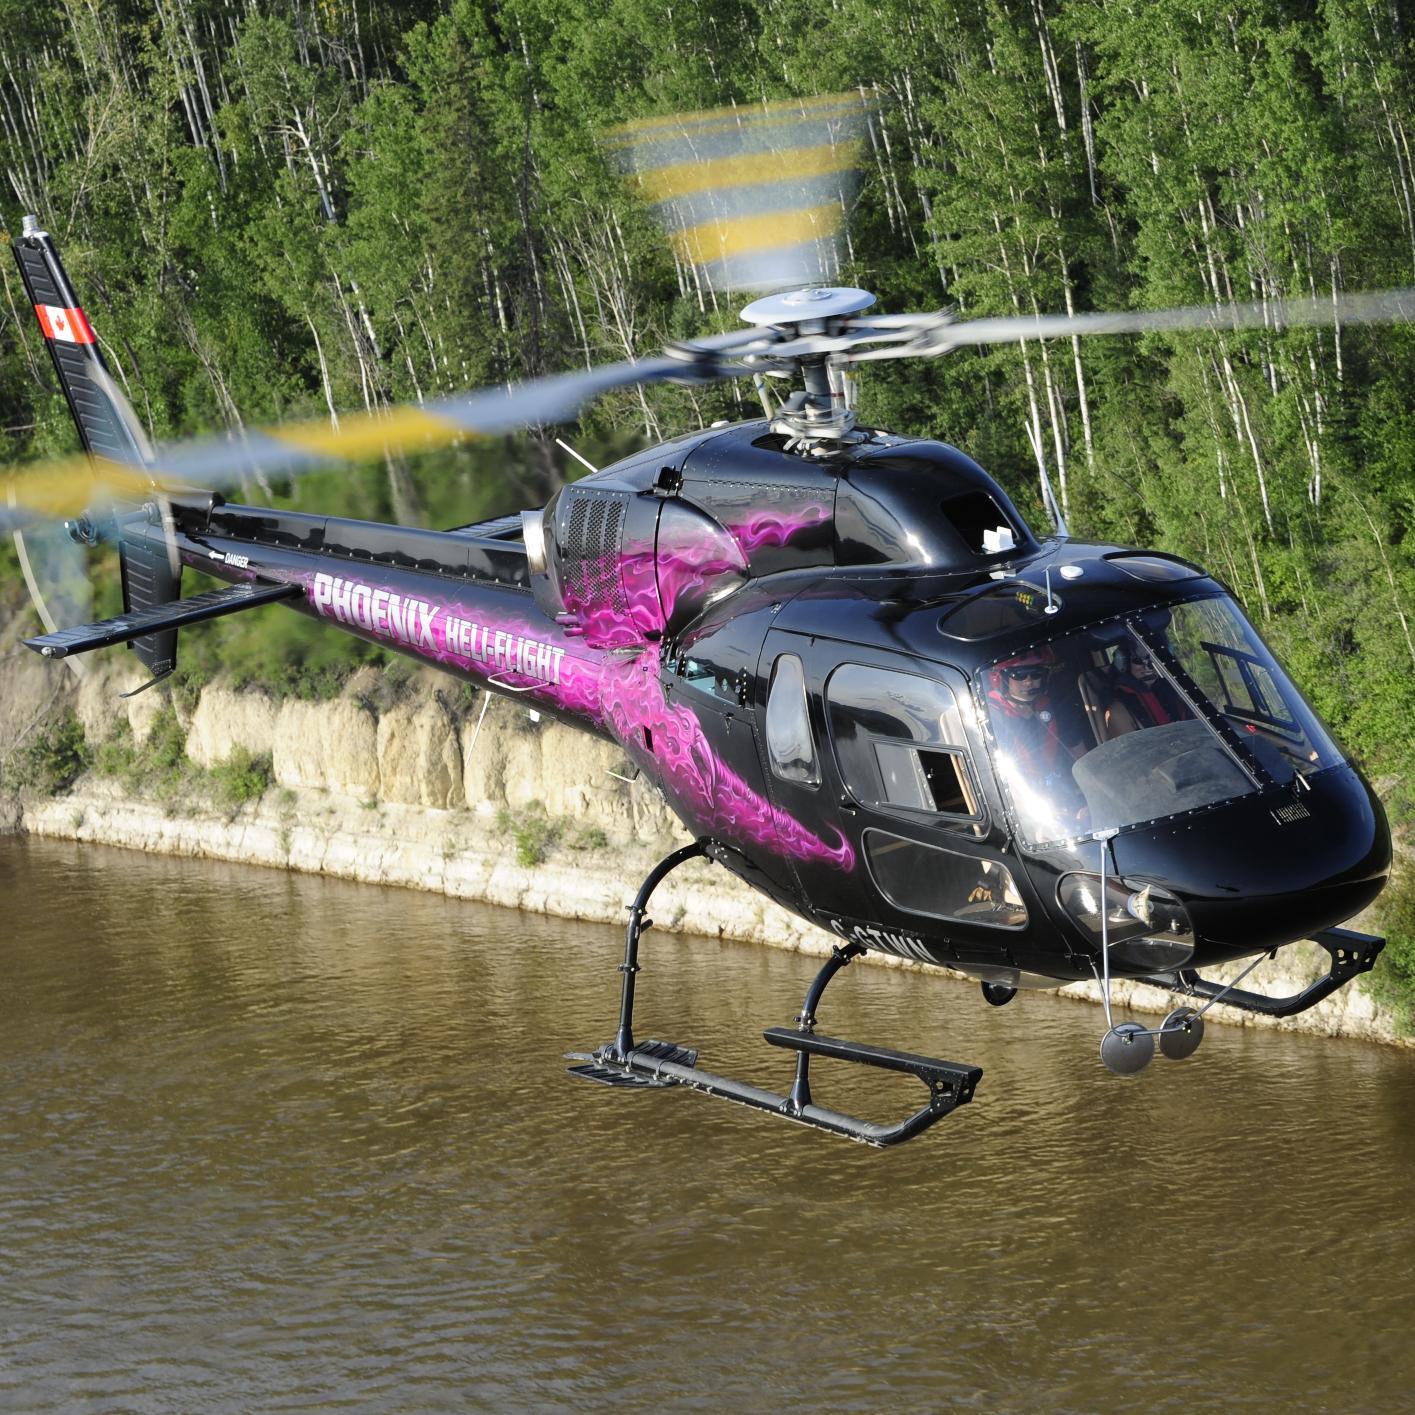 Phoenix Heli-Flight is a locally owned helicopter company committed to providing safe, professional charter services in the Wood Buffalo region.